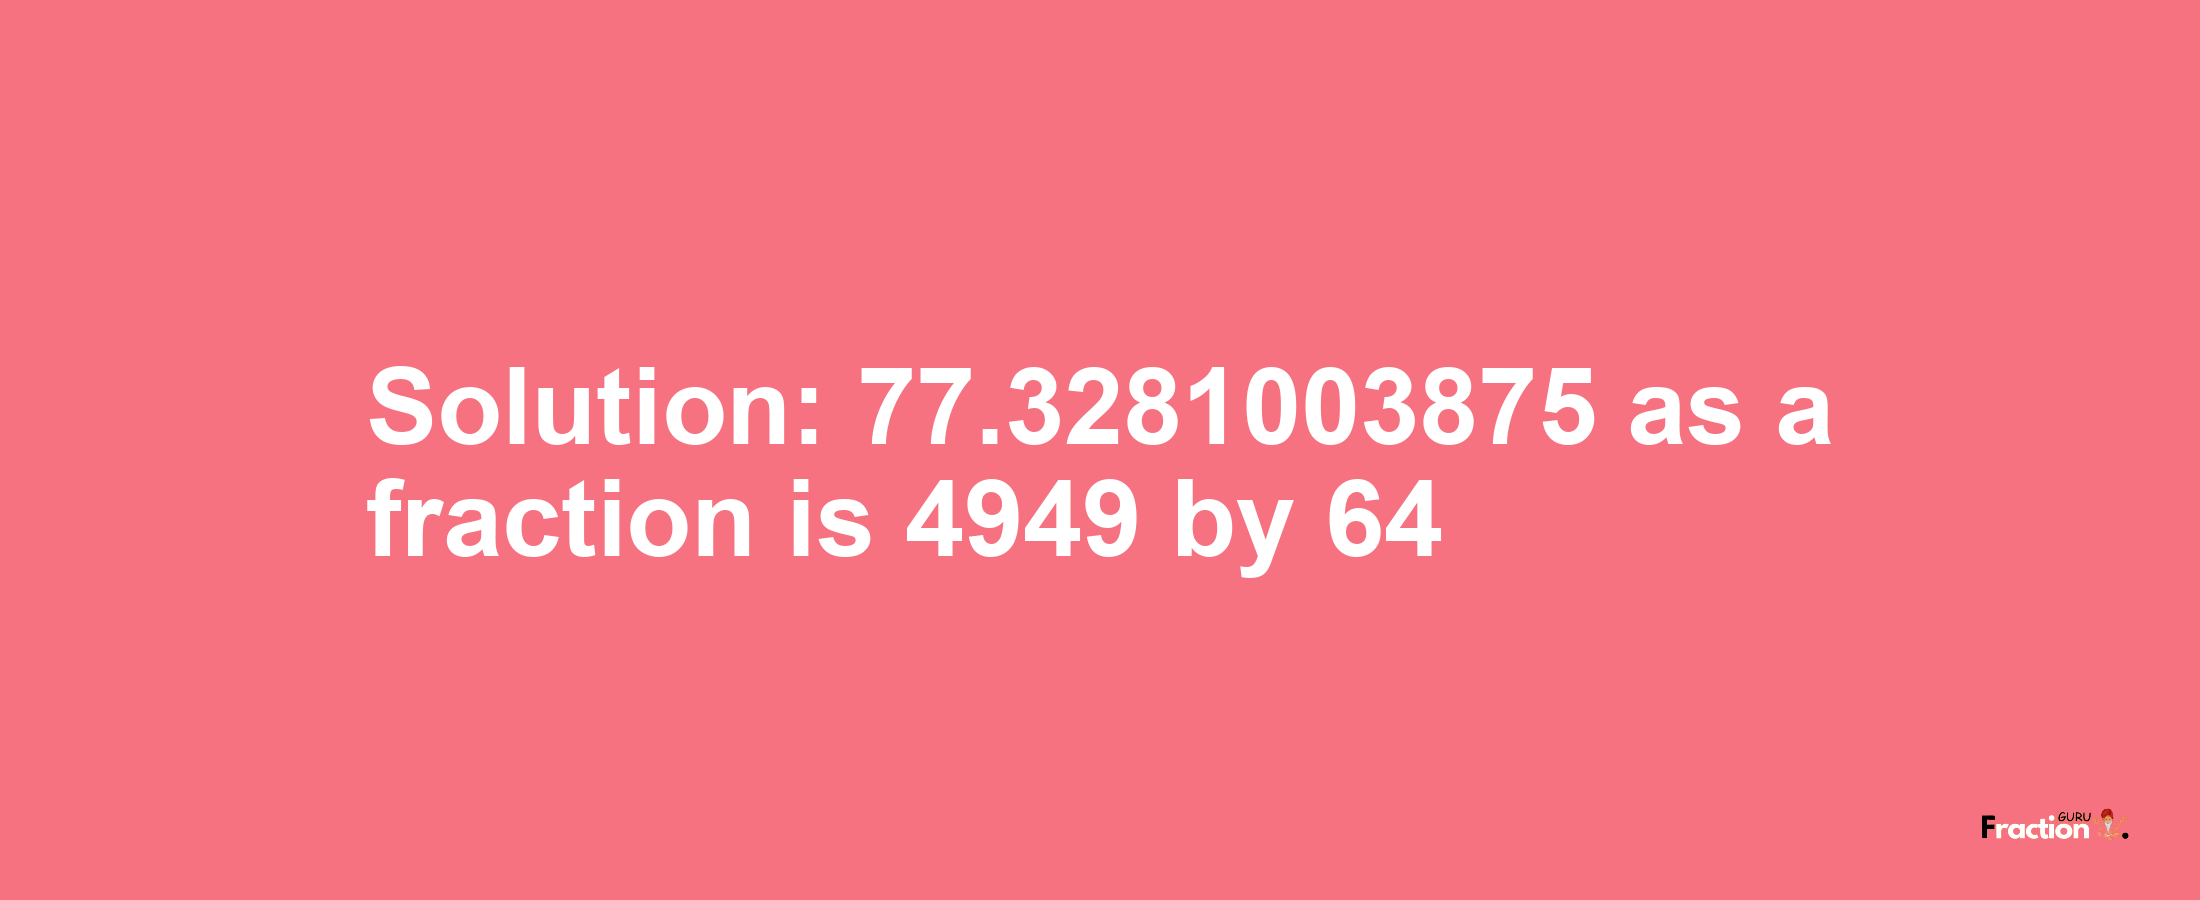 Solution:77.3281003875 as a fraction is 4949/64